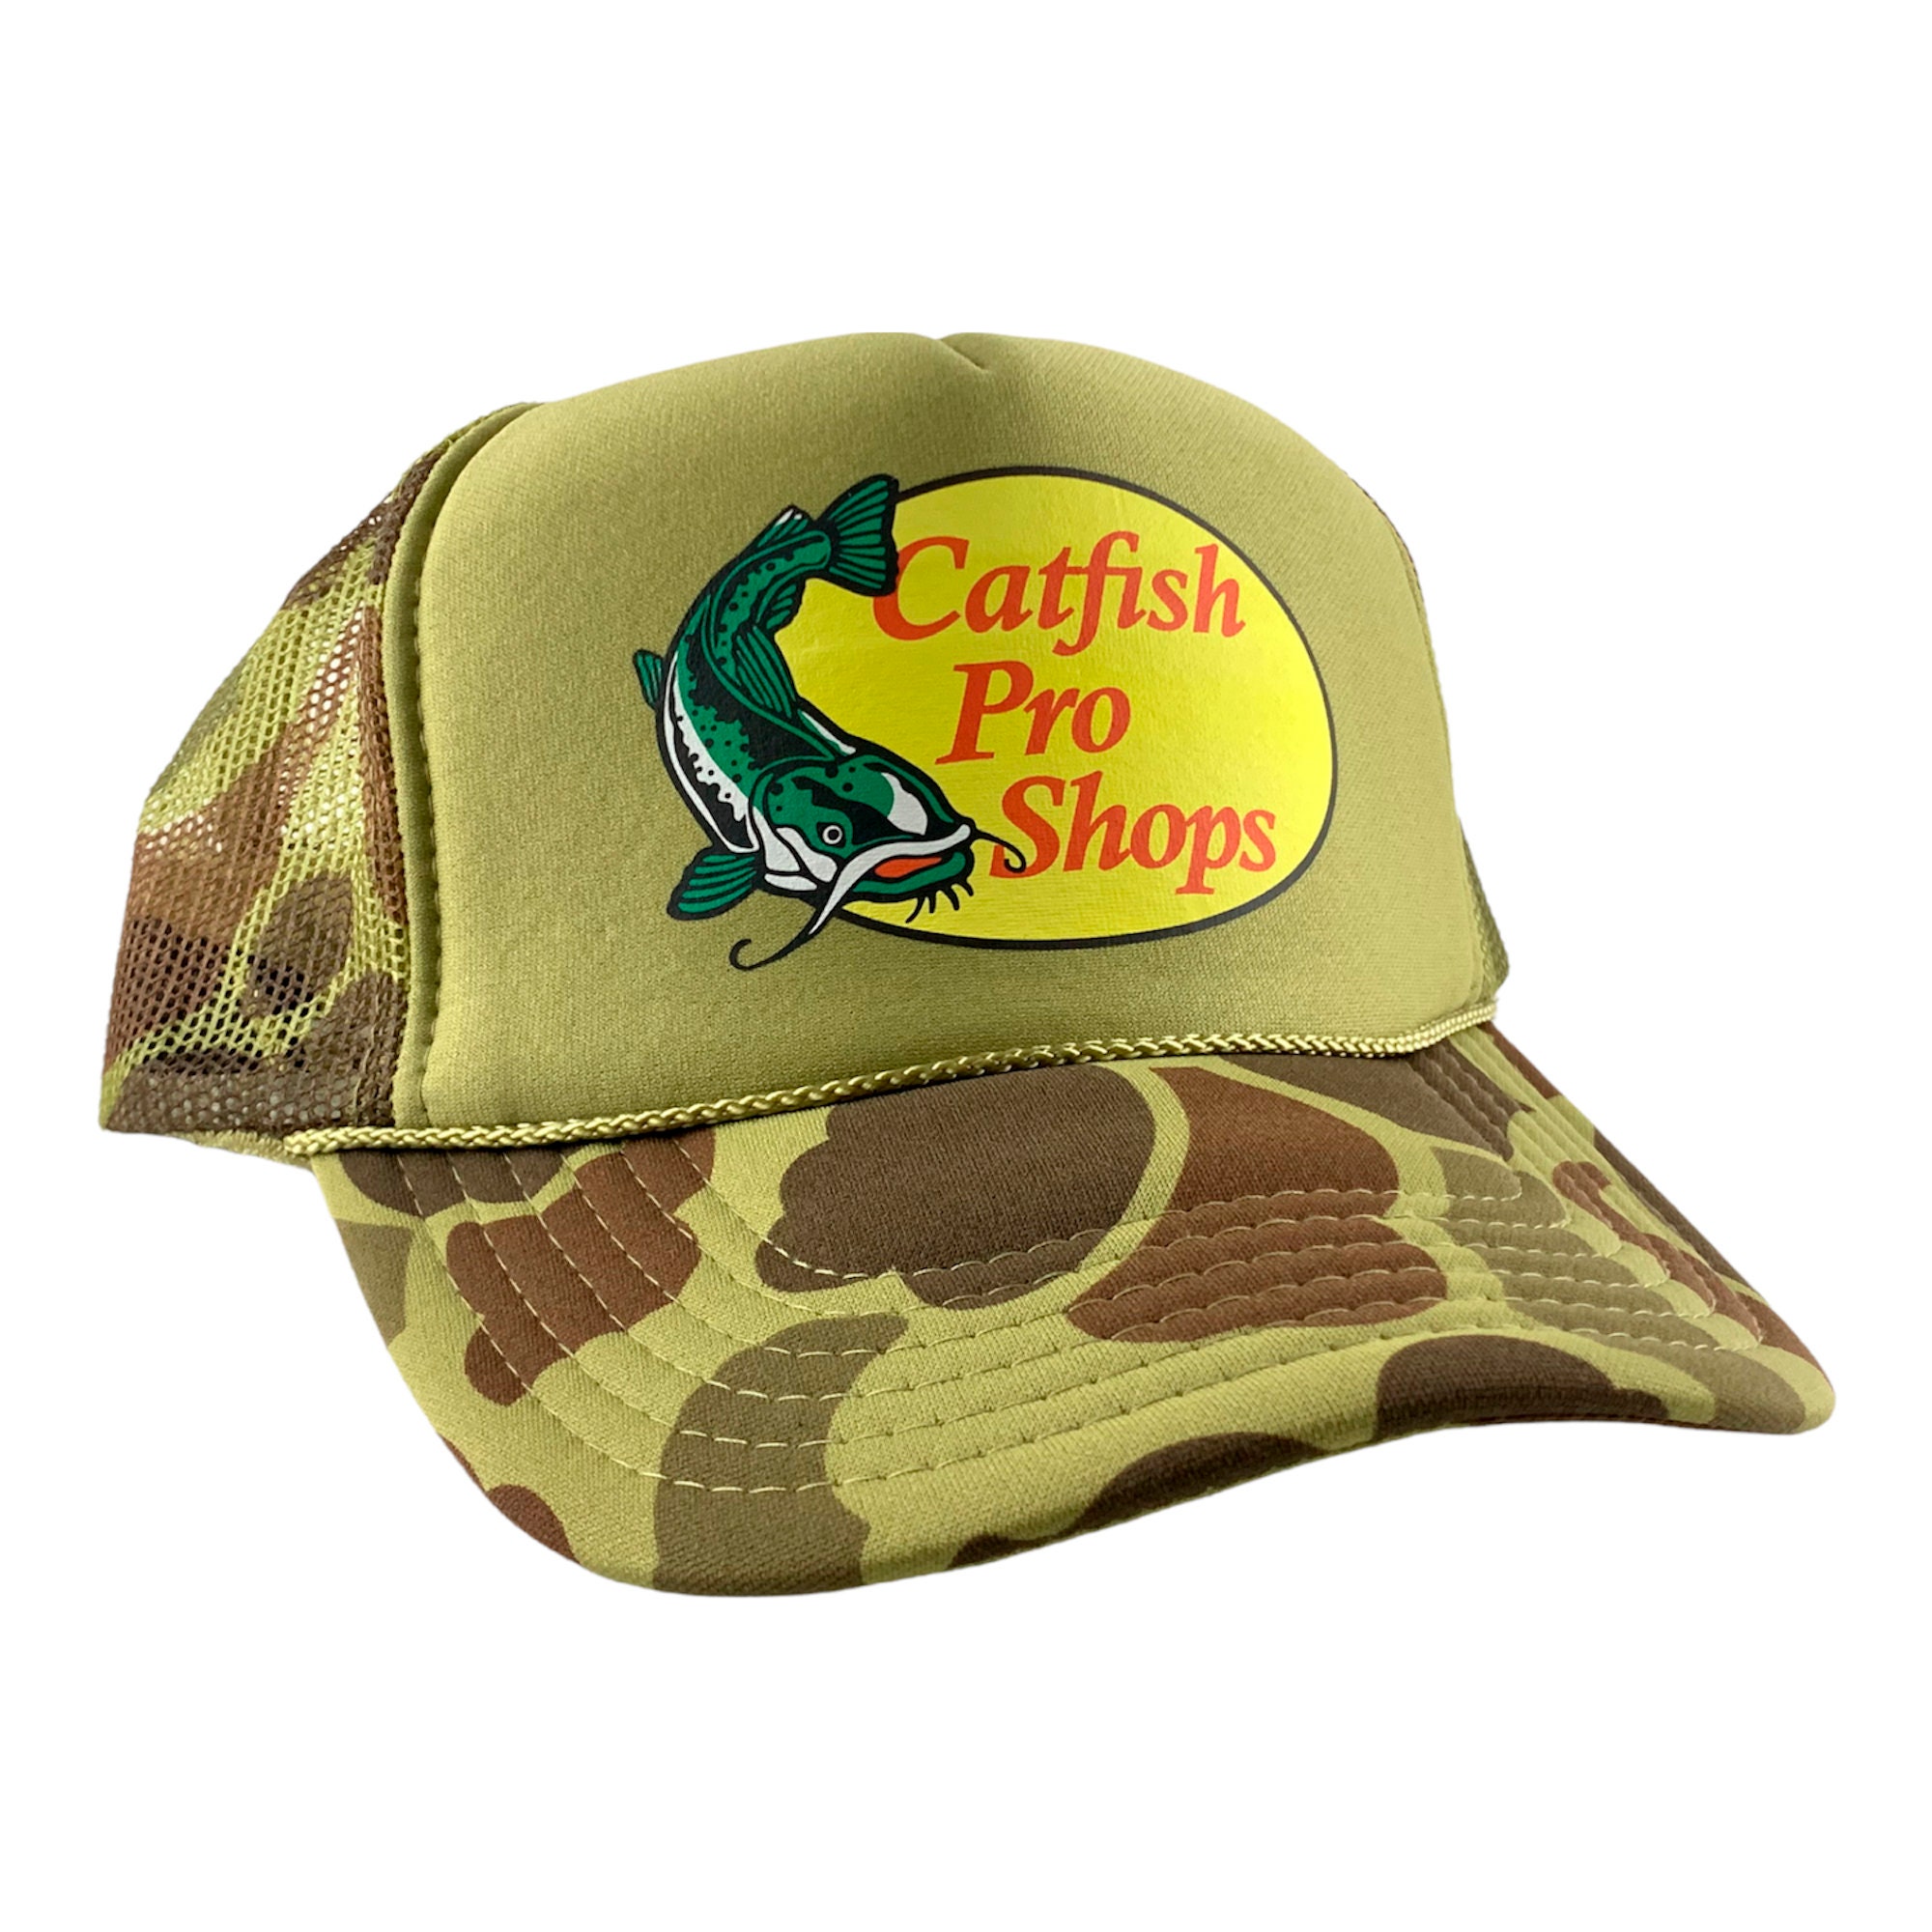 Catfish Pro Shops Hat, Trucker Hat, Fishing Hat, Father Gift, Gift for Him, Mesh Hat, Cap, Camo Hat, Lake Hat, Father's Day, Dad, Fish Hat